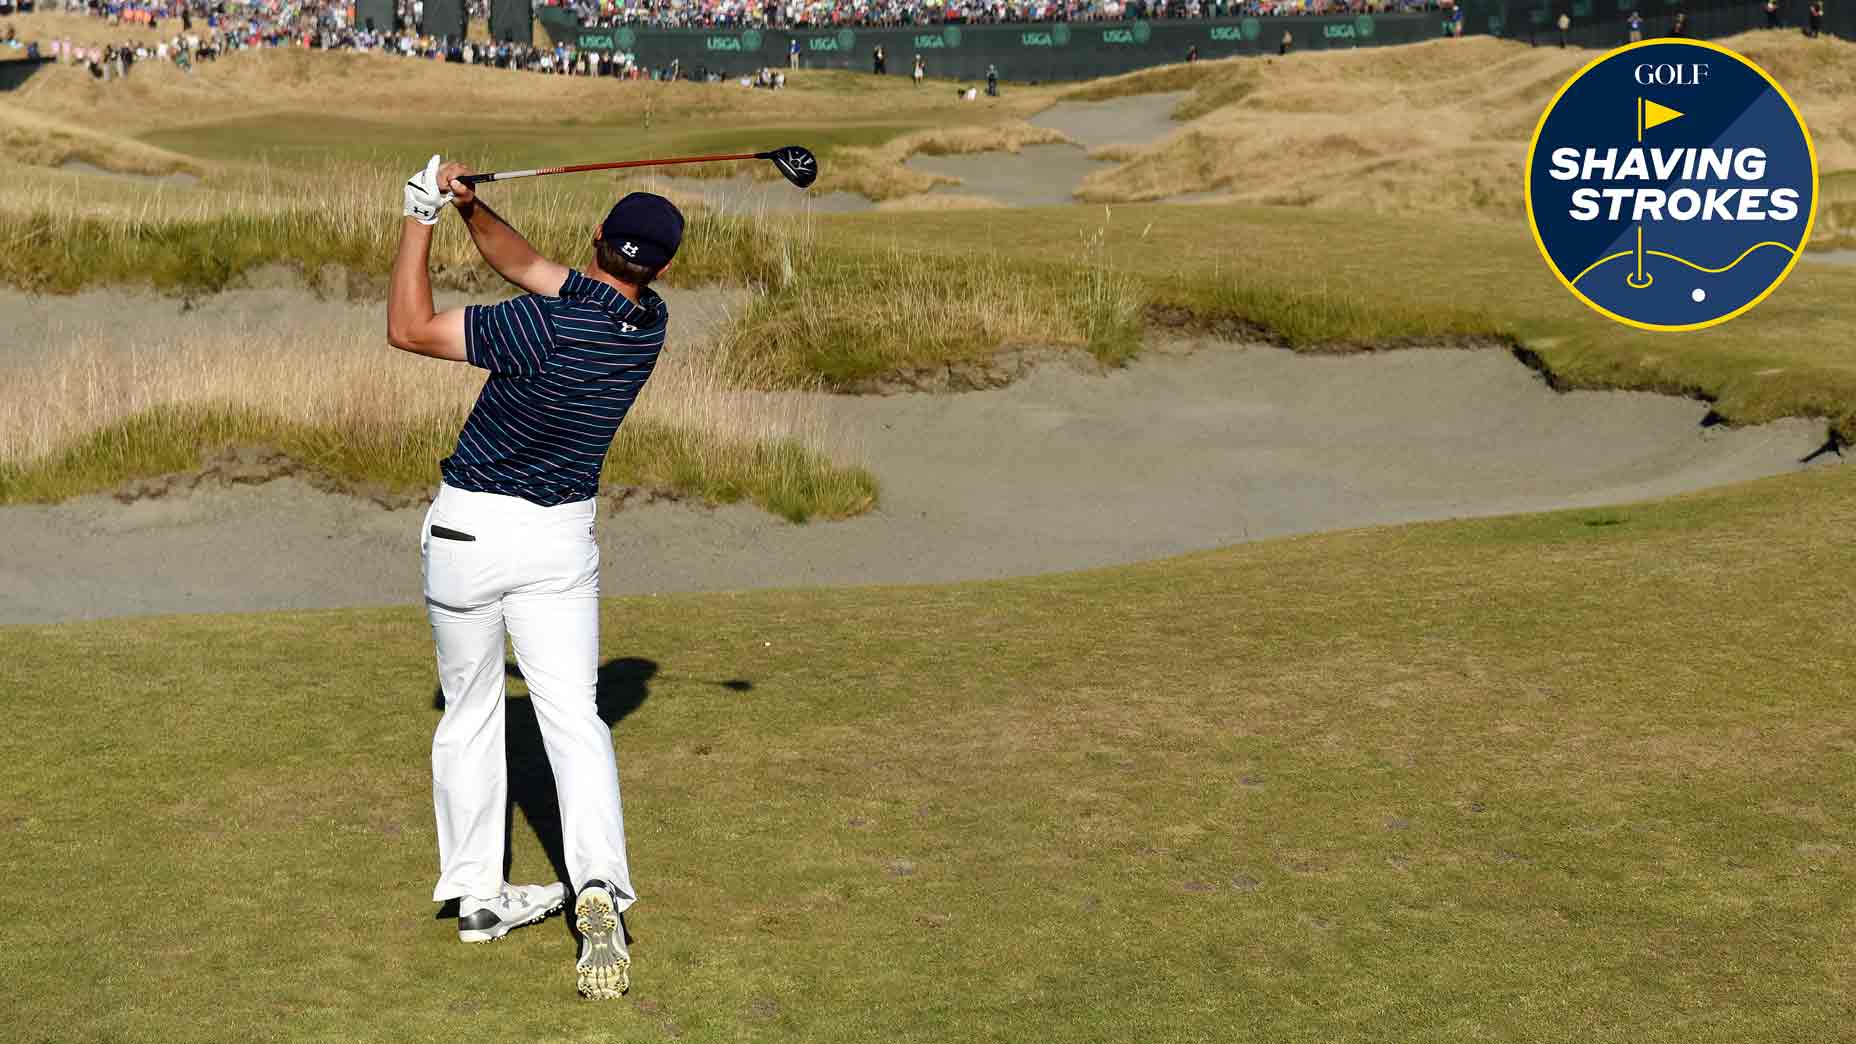 After a recent round at Chambers Bay, host of the 2015 U.S. Open, Instruction Editor Nick Dimengo shares 7 useful tips he learned